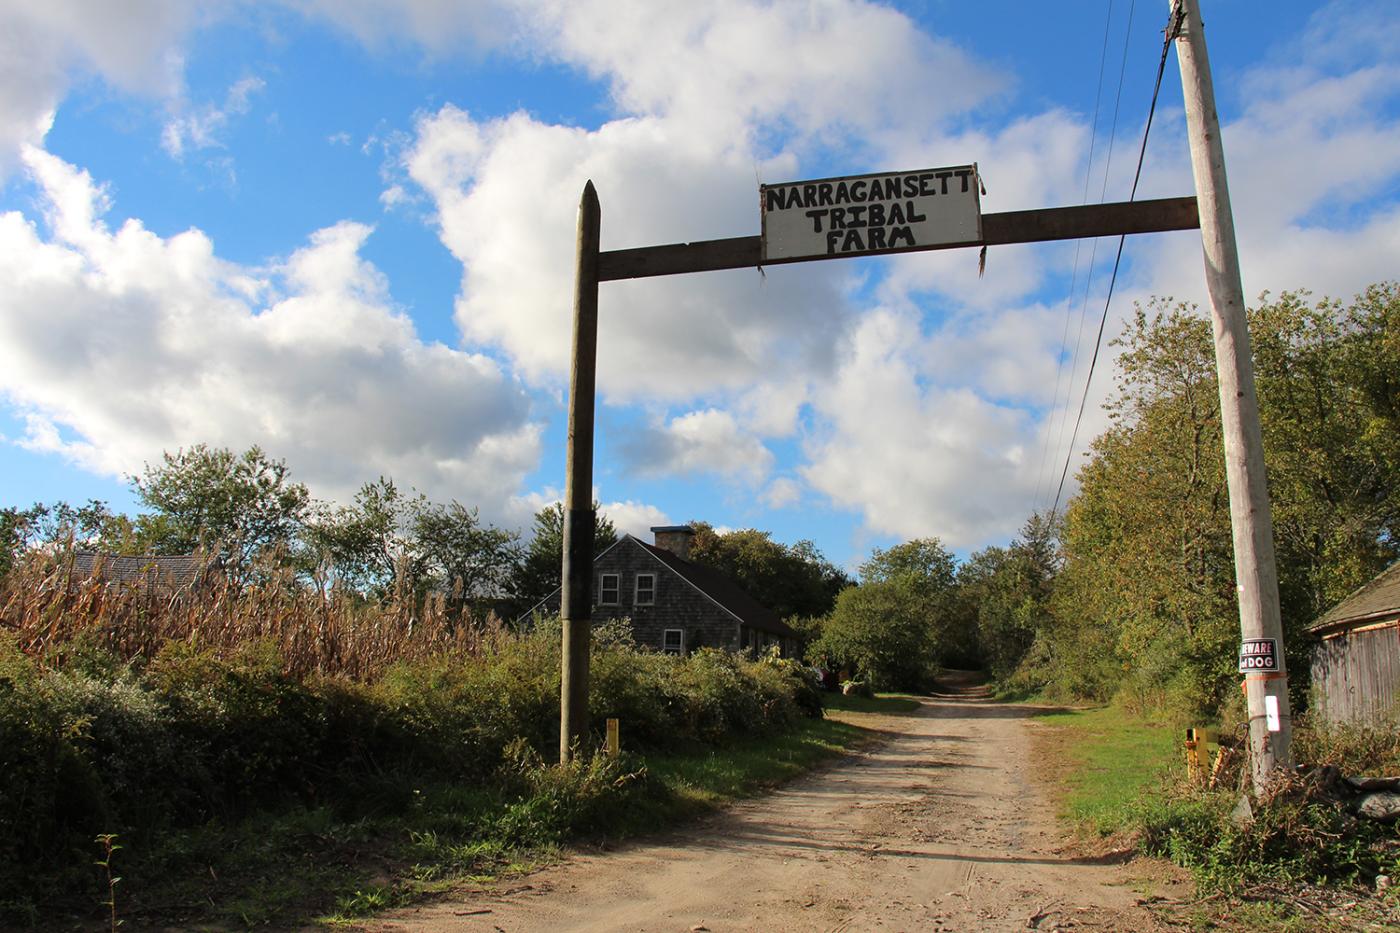 The entrance to the Crandall “minacommuck” Farm in Westerly, Rhode Island has a dirt road leading to the main property. A sign that reads “Narragansett Tribal Farm” is attached to a board between two tall wooden posts in the foreground. In the background, a small building is seen on the left side of the dirt road. Blue sky, clouds, and sunshine spill across the property. 